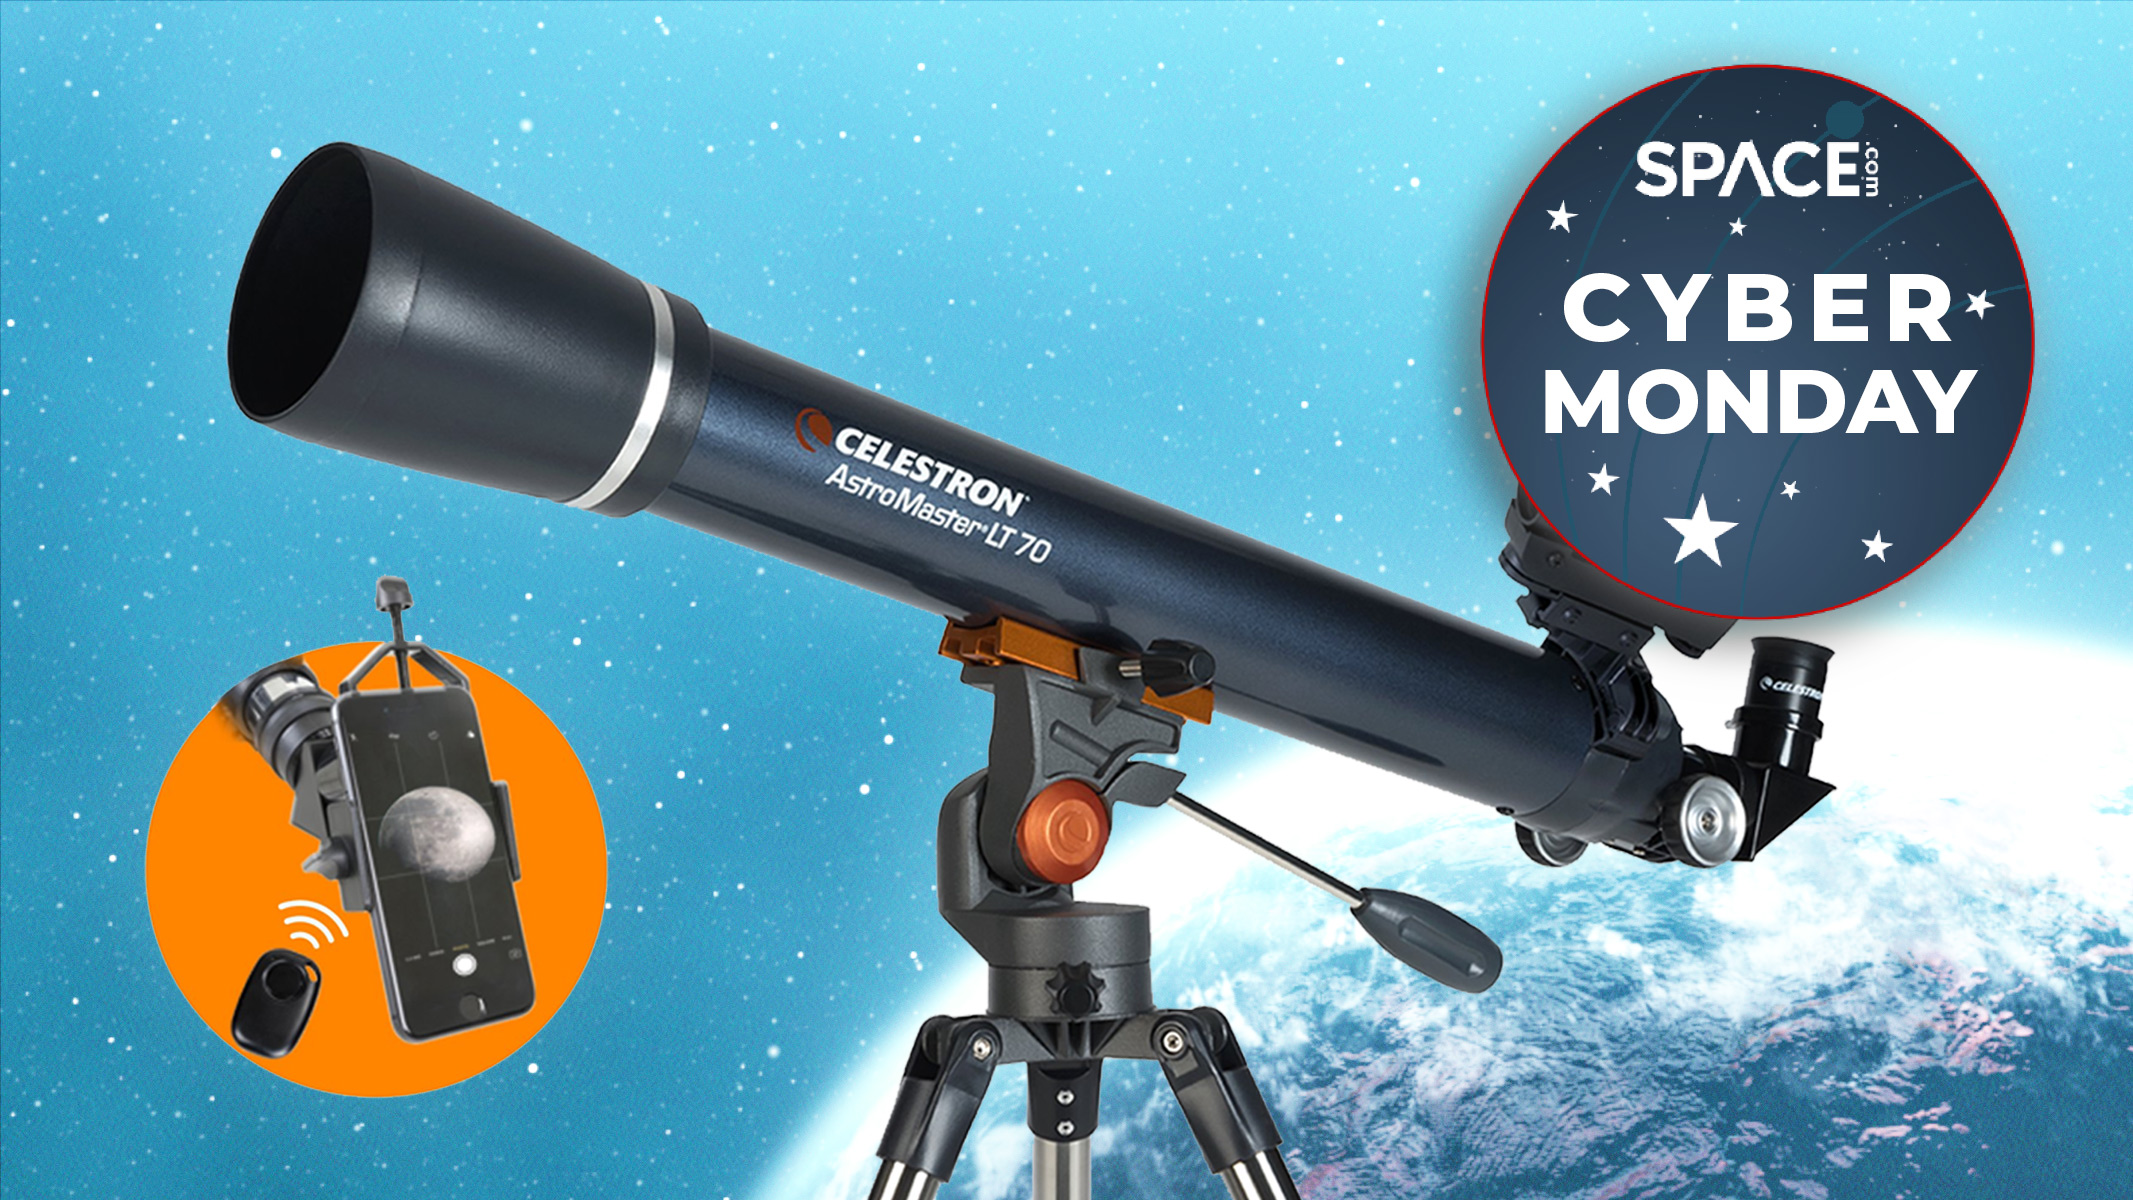 The perfect astronomy gift: This beginner telescope is currently under $100